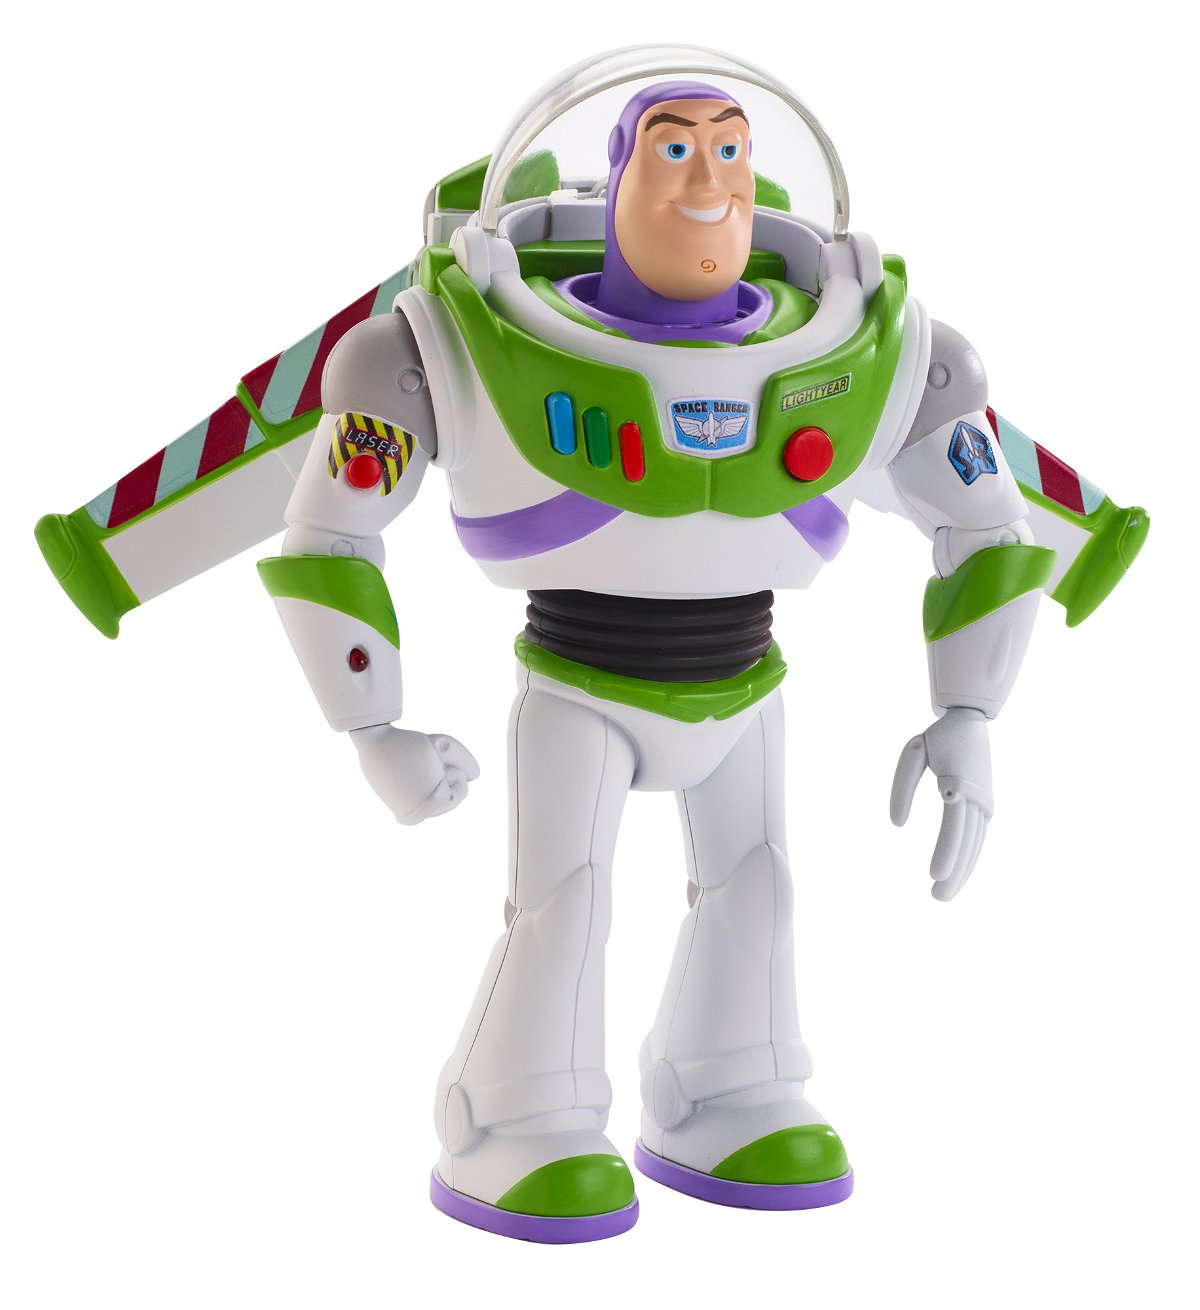 Buzz - Toy Story 4 action figure